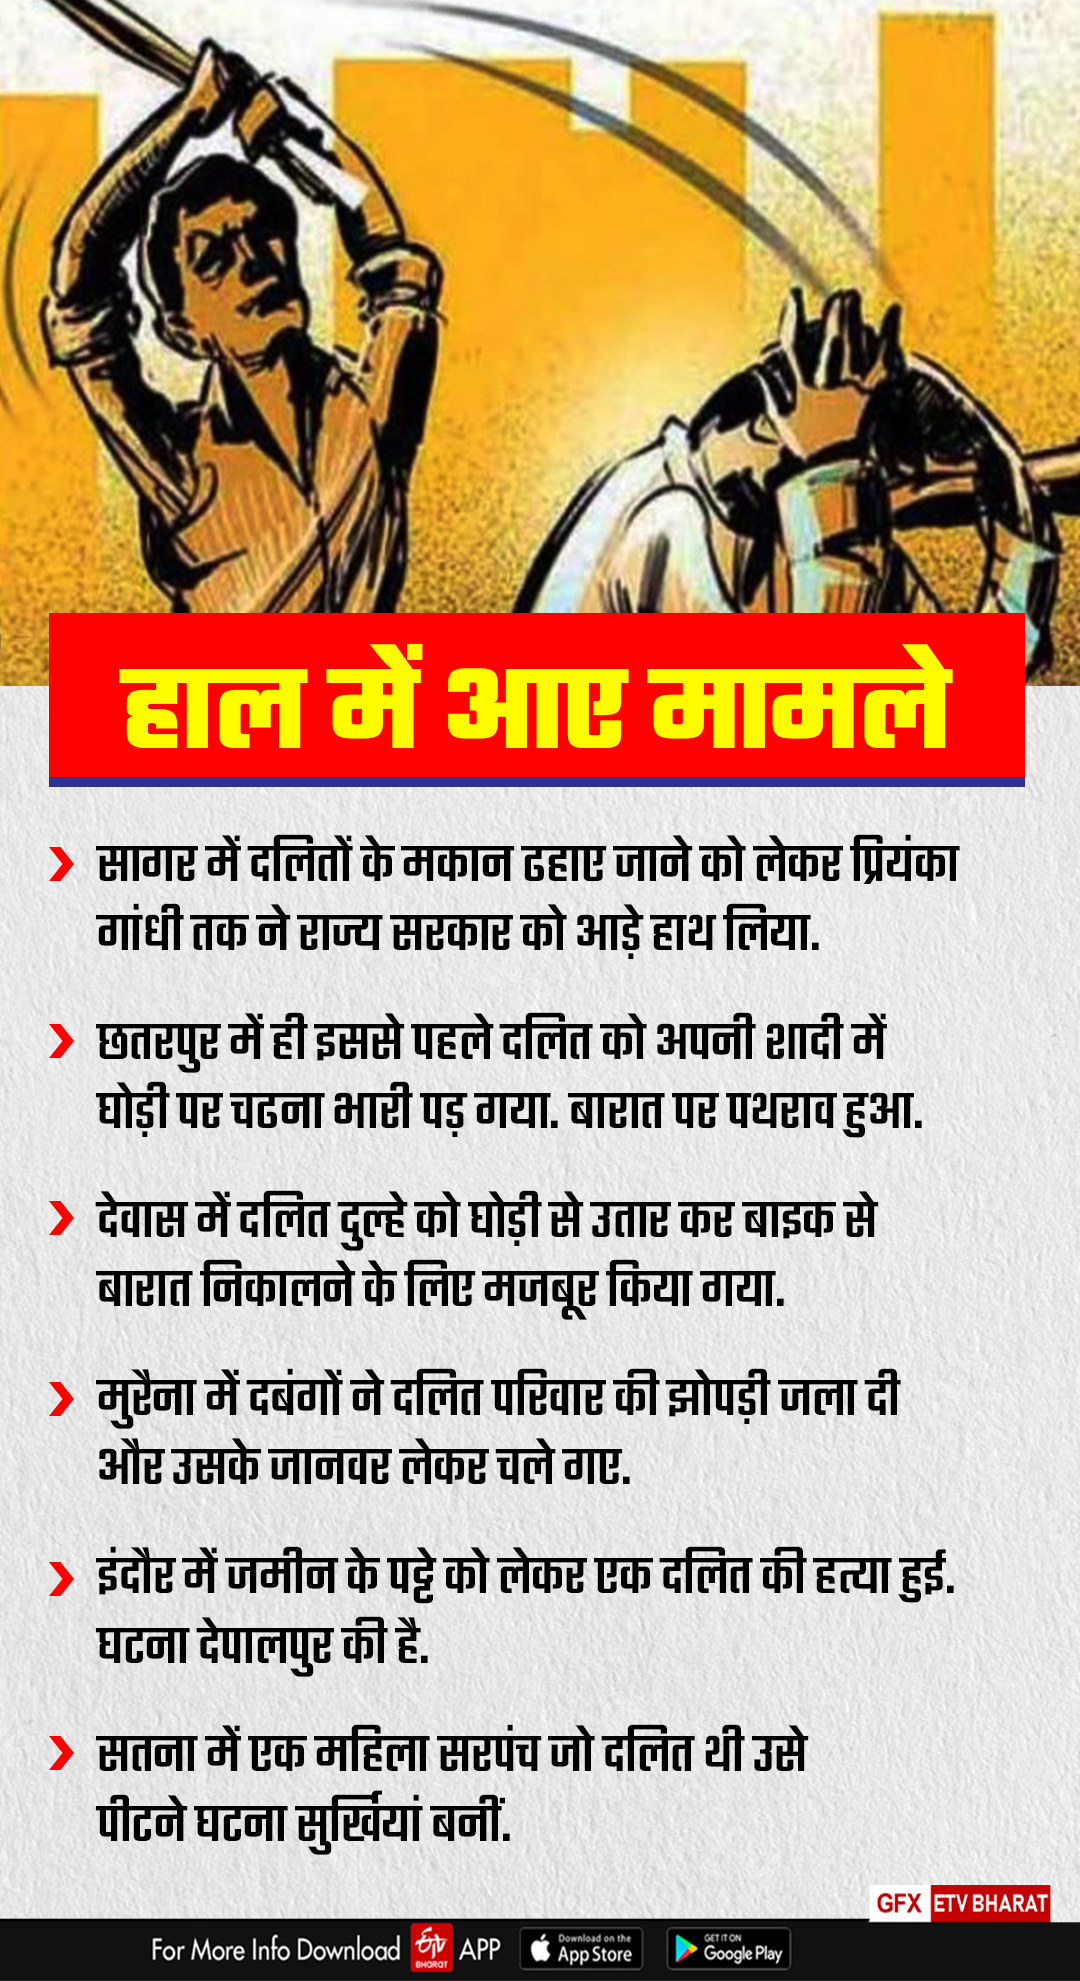 Crimes on Dalits in MP